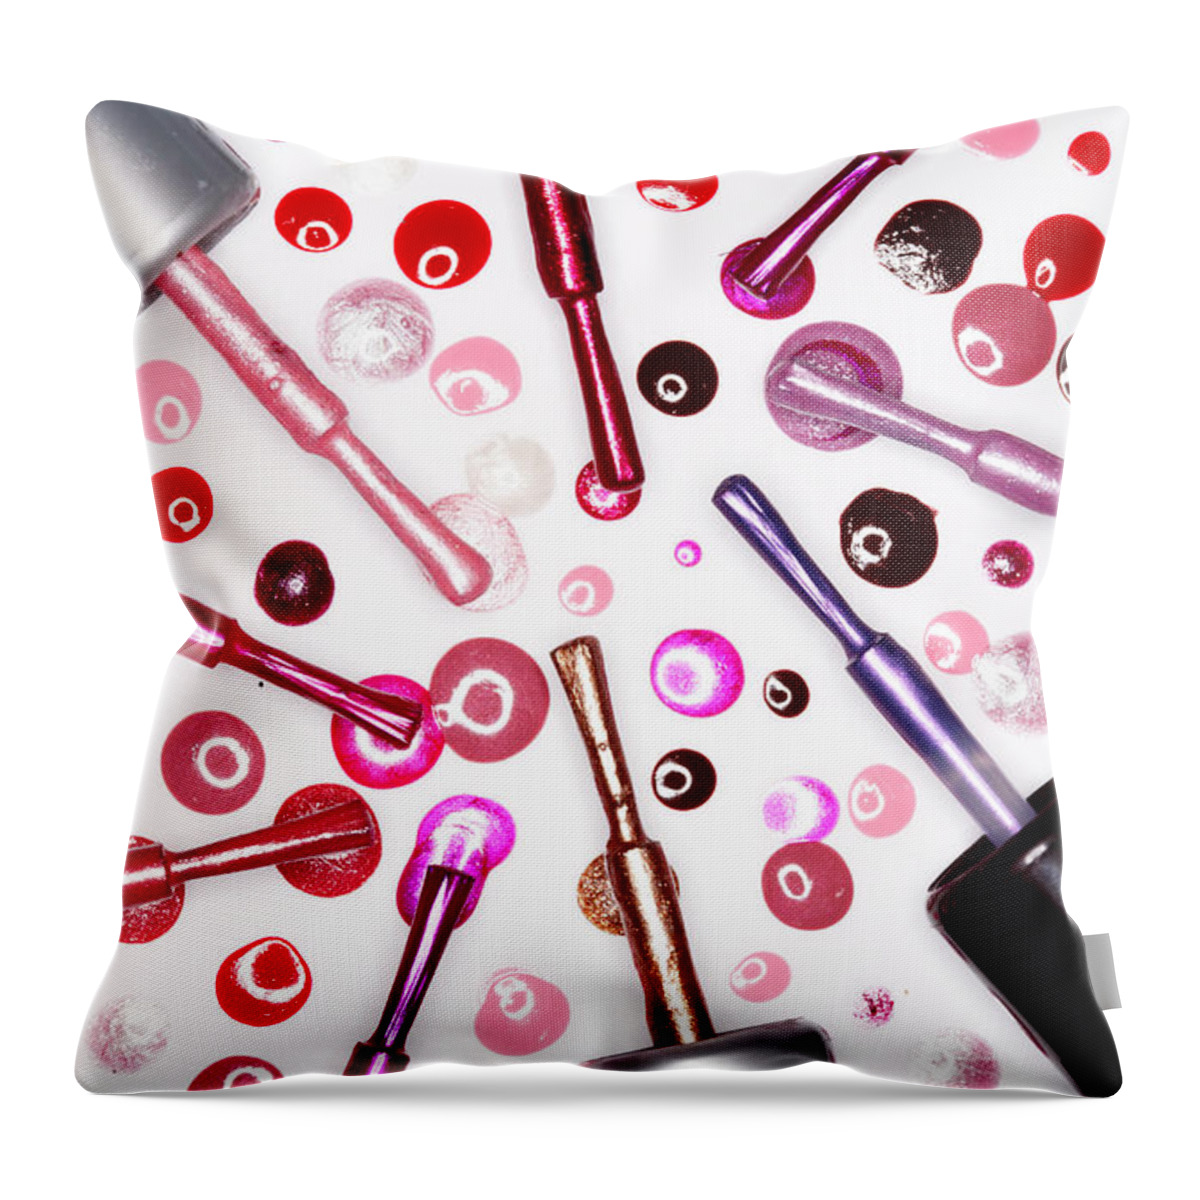 White Background Throw Pillow featuring the photograph Assorted Nail Varnish Lids With Brushes by Martin Poole